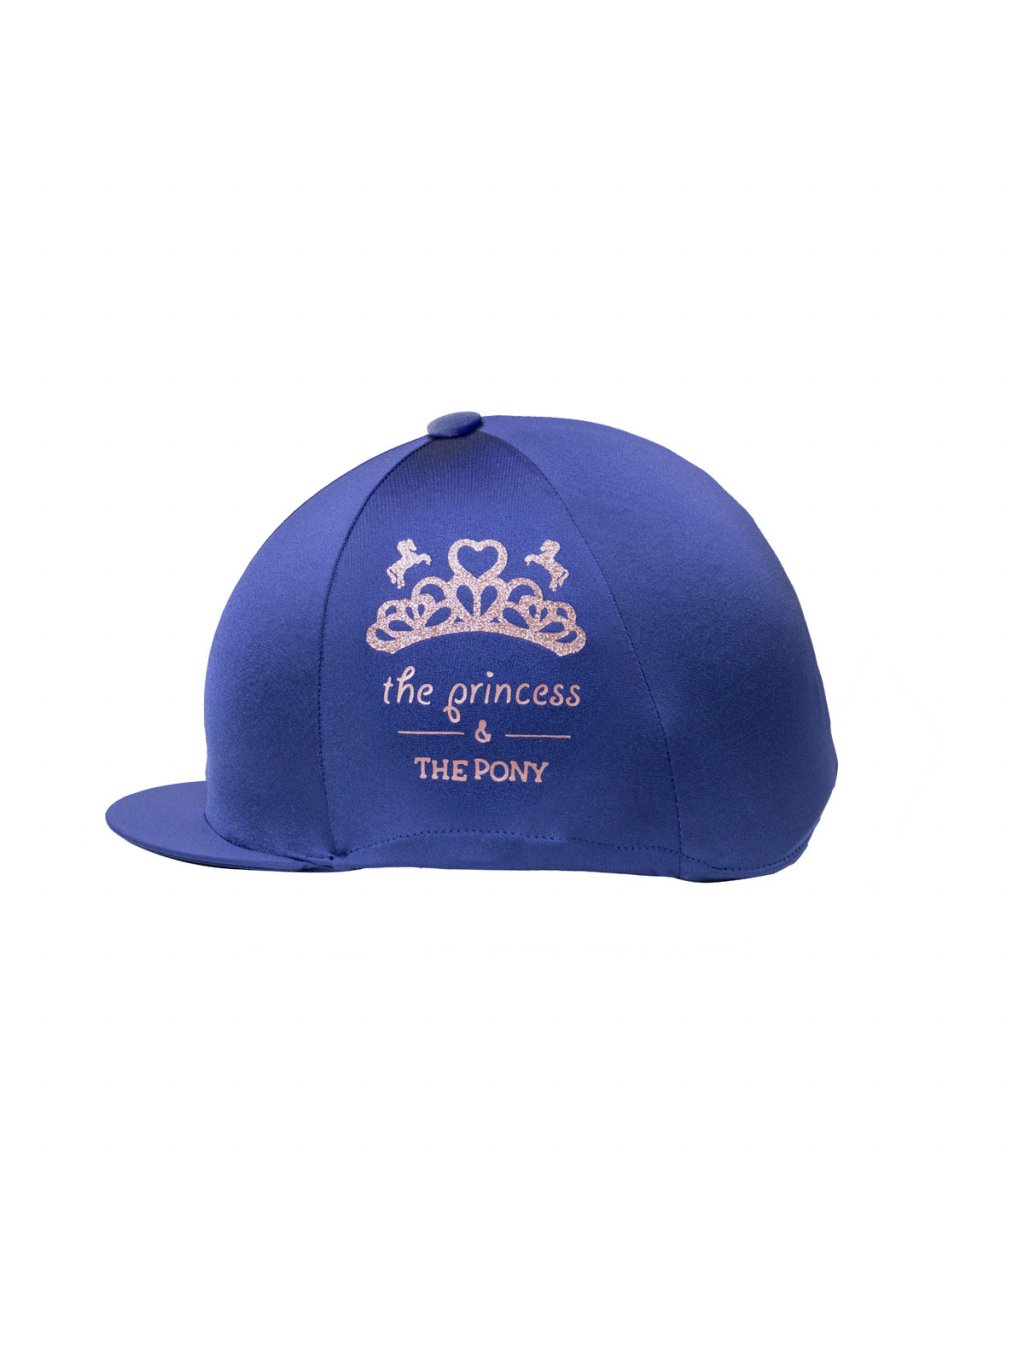 PR 36959 Little Rider The Princess and the Pony Hat Cover 01